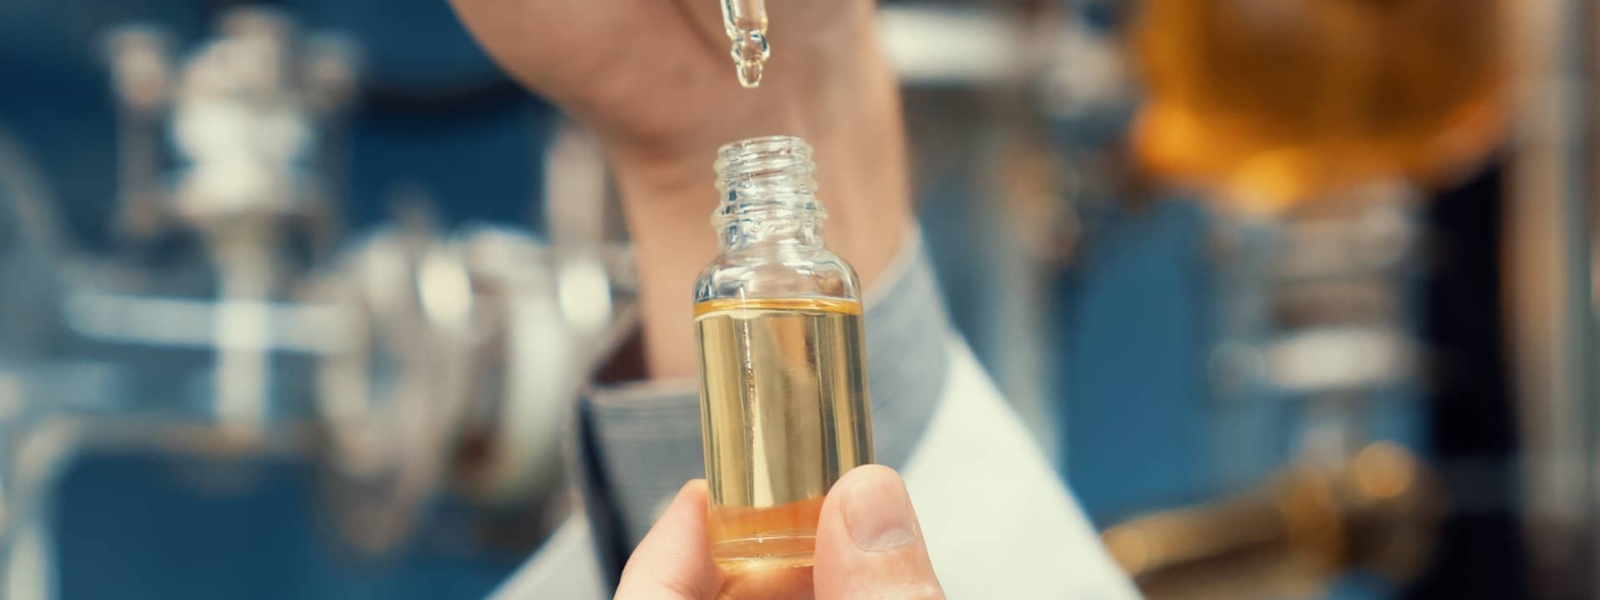 A scientist extracts CBD hemp oil for medicinal purposes in a laboratory.